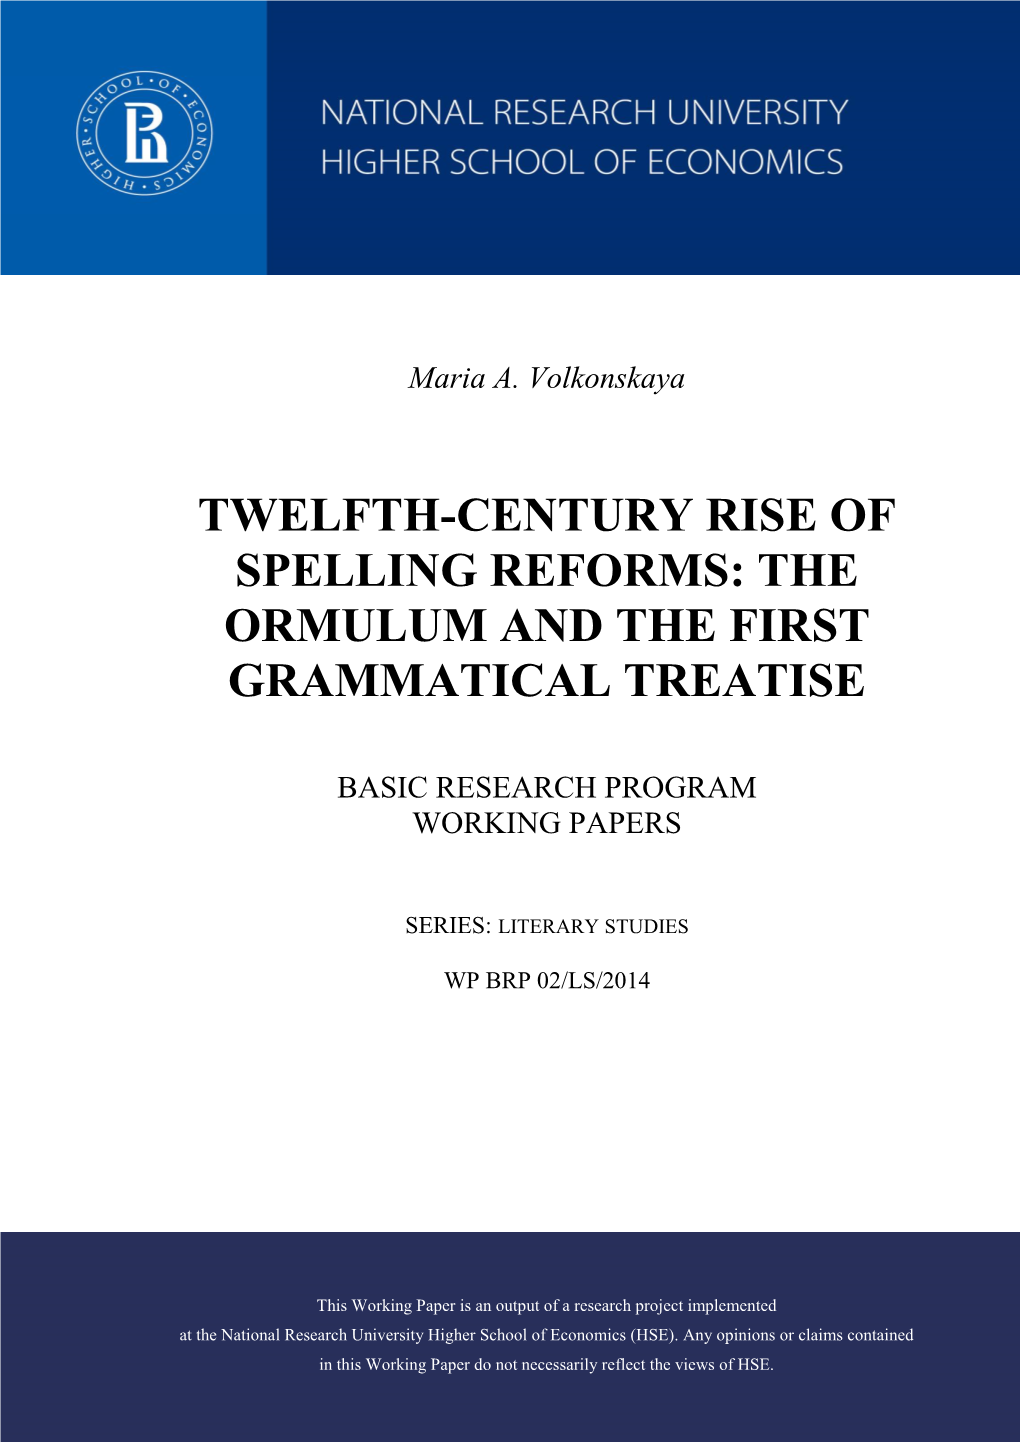 Twelfth-Century Rise of Spelling Reforms: the Ormulum and the First Grammatical Treatise